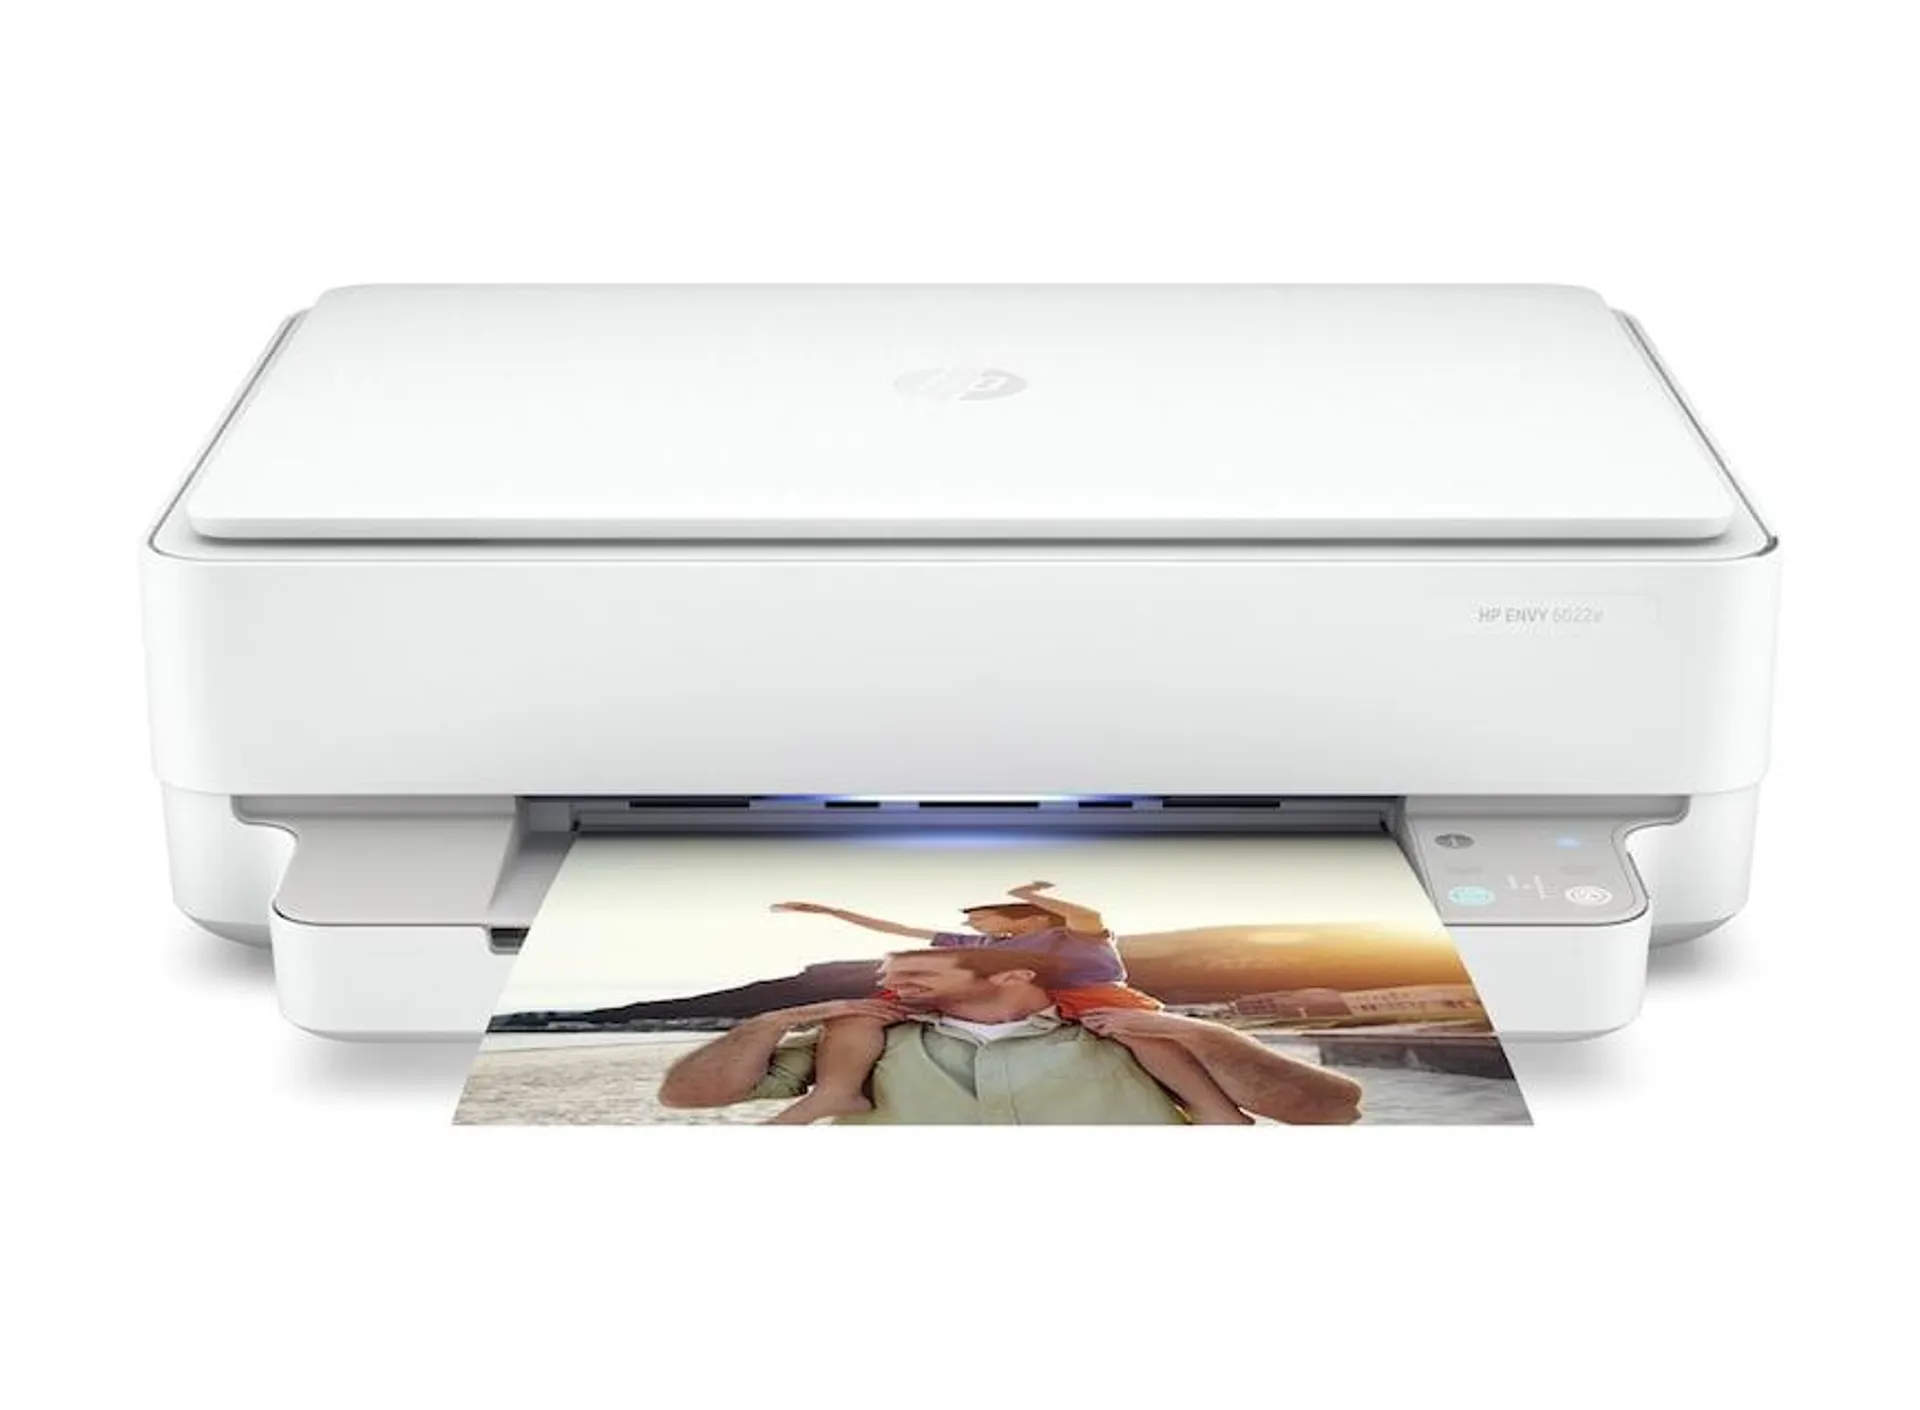 HP Envy 6022e HP+ enabled All-in-One Wireless Colour Printer with 3 months Instant Ink